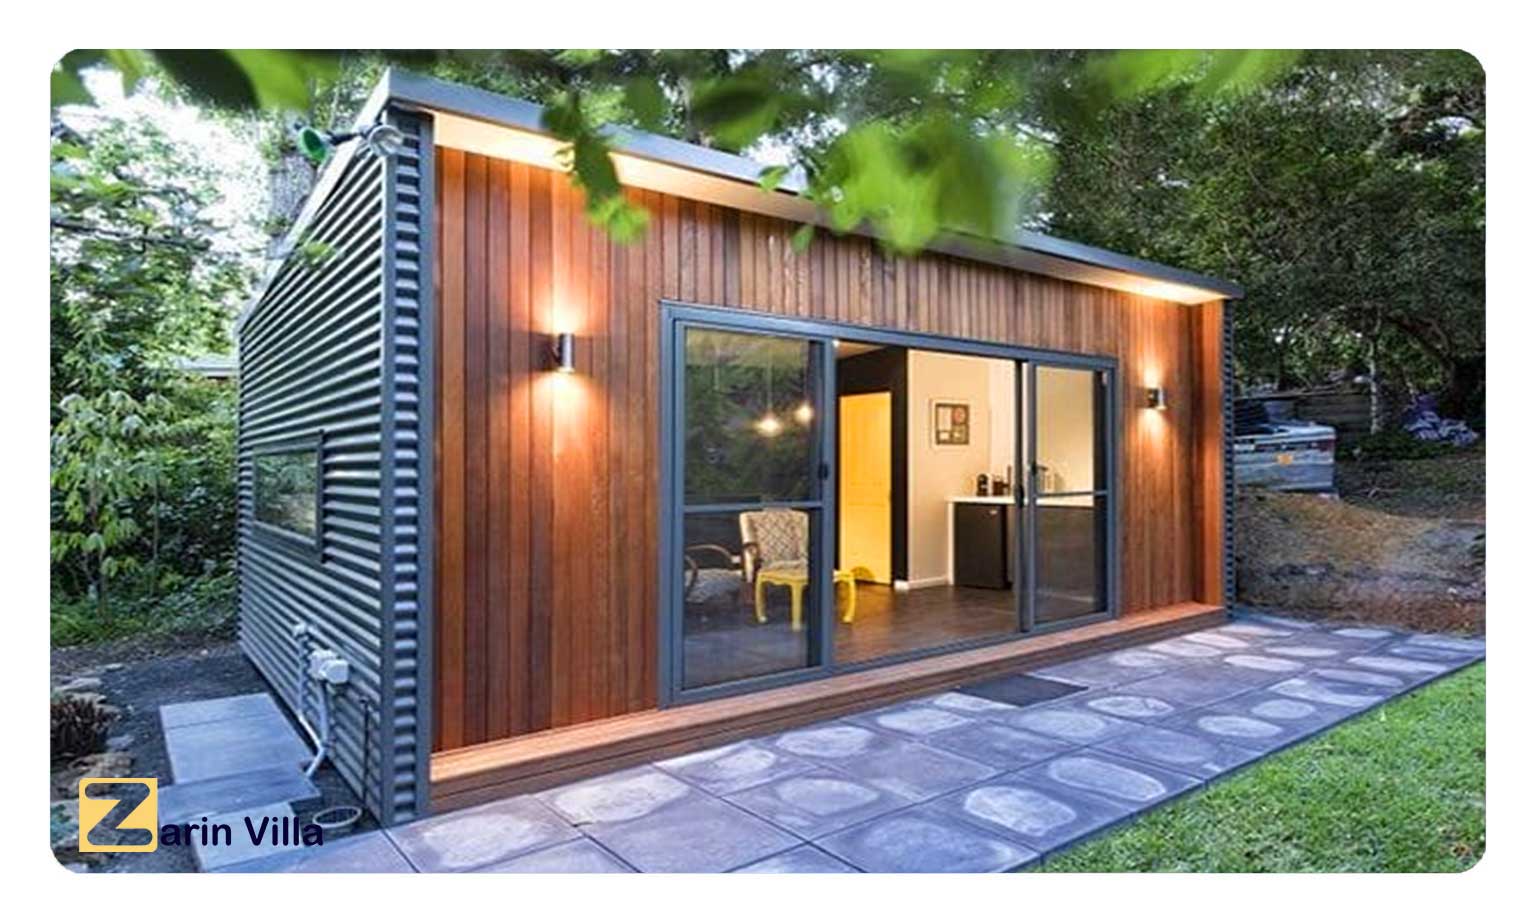 The price of a second-hand prefabricated house